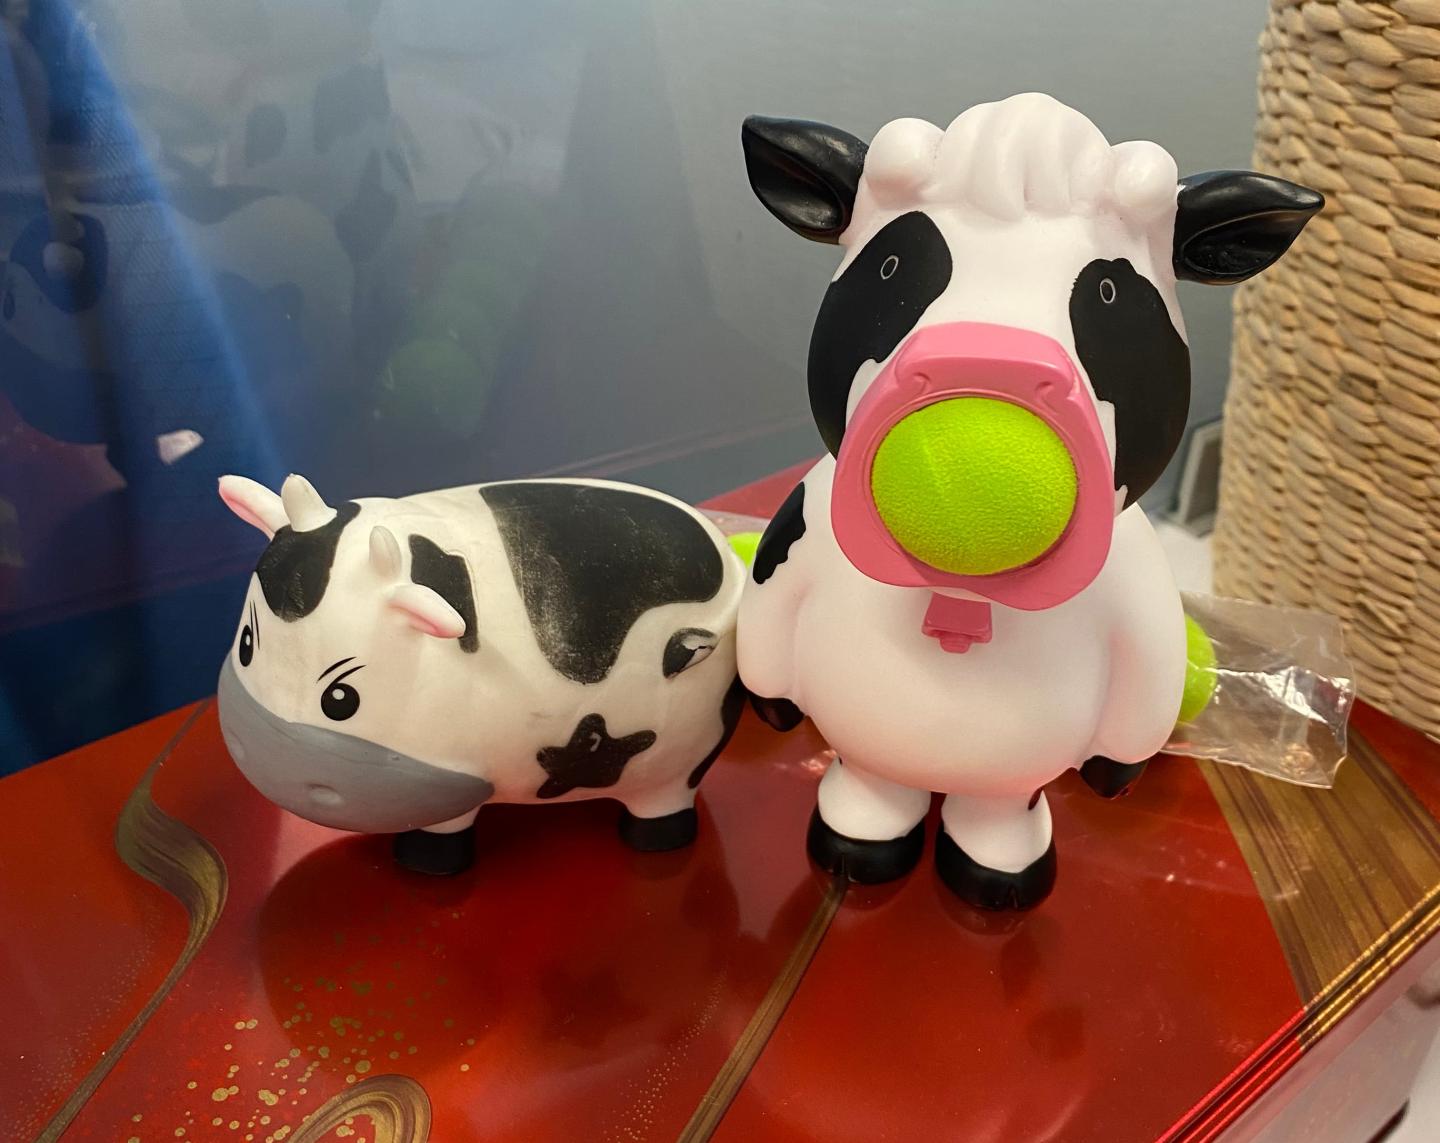 Two plastic cows sitting on a desk